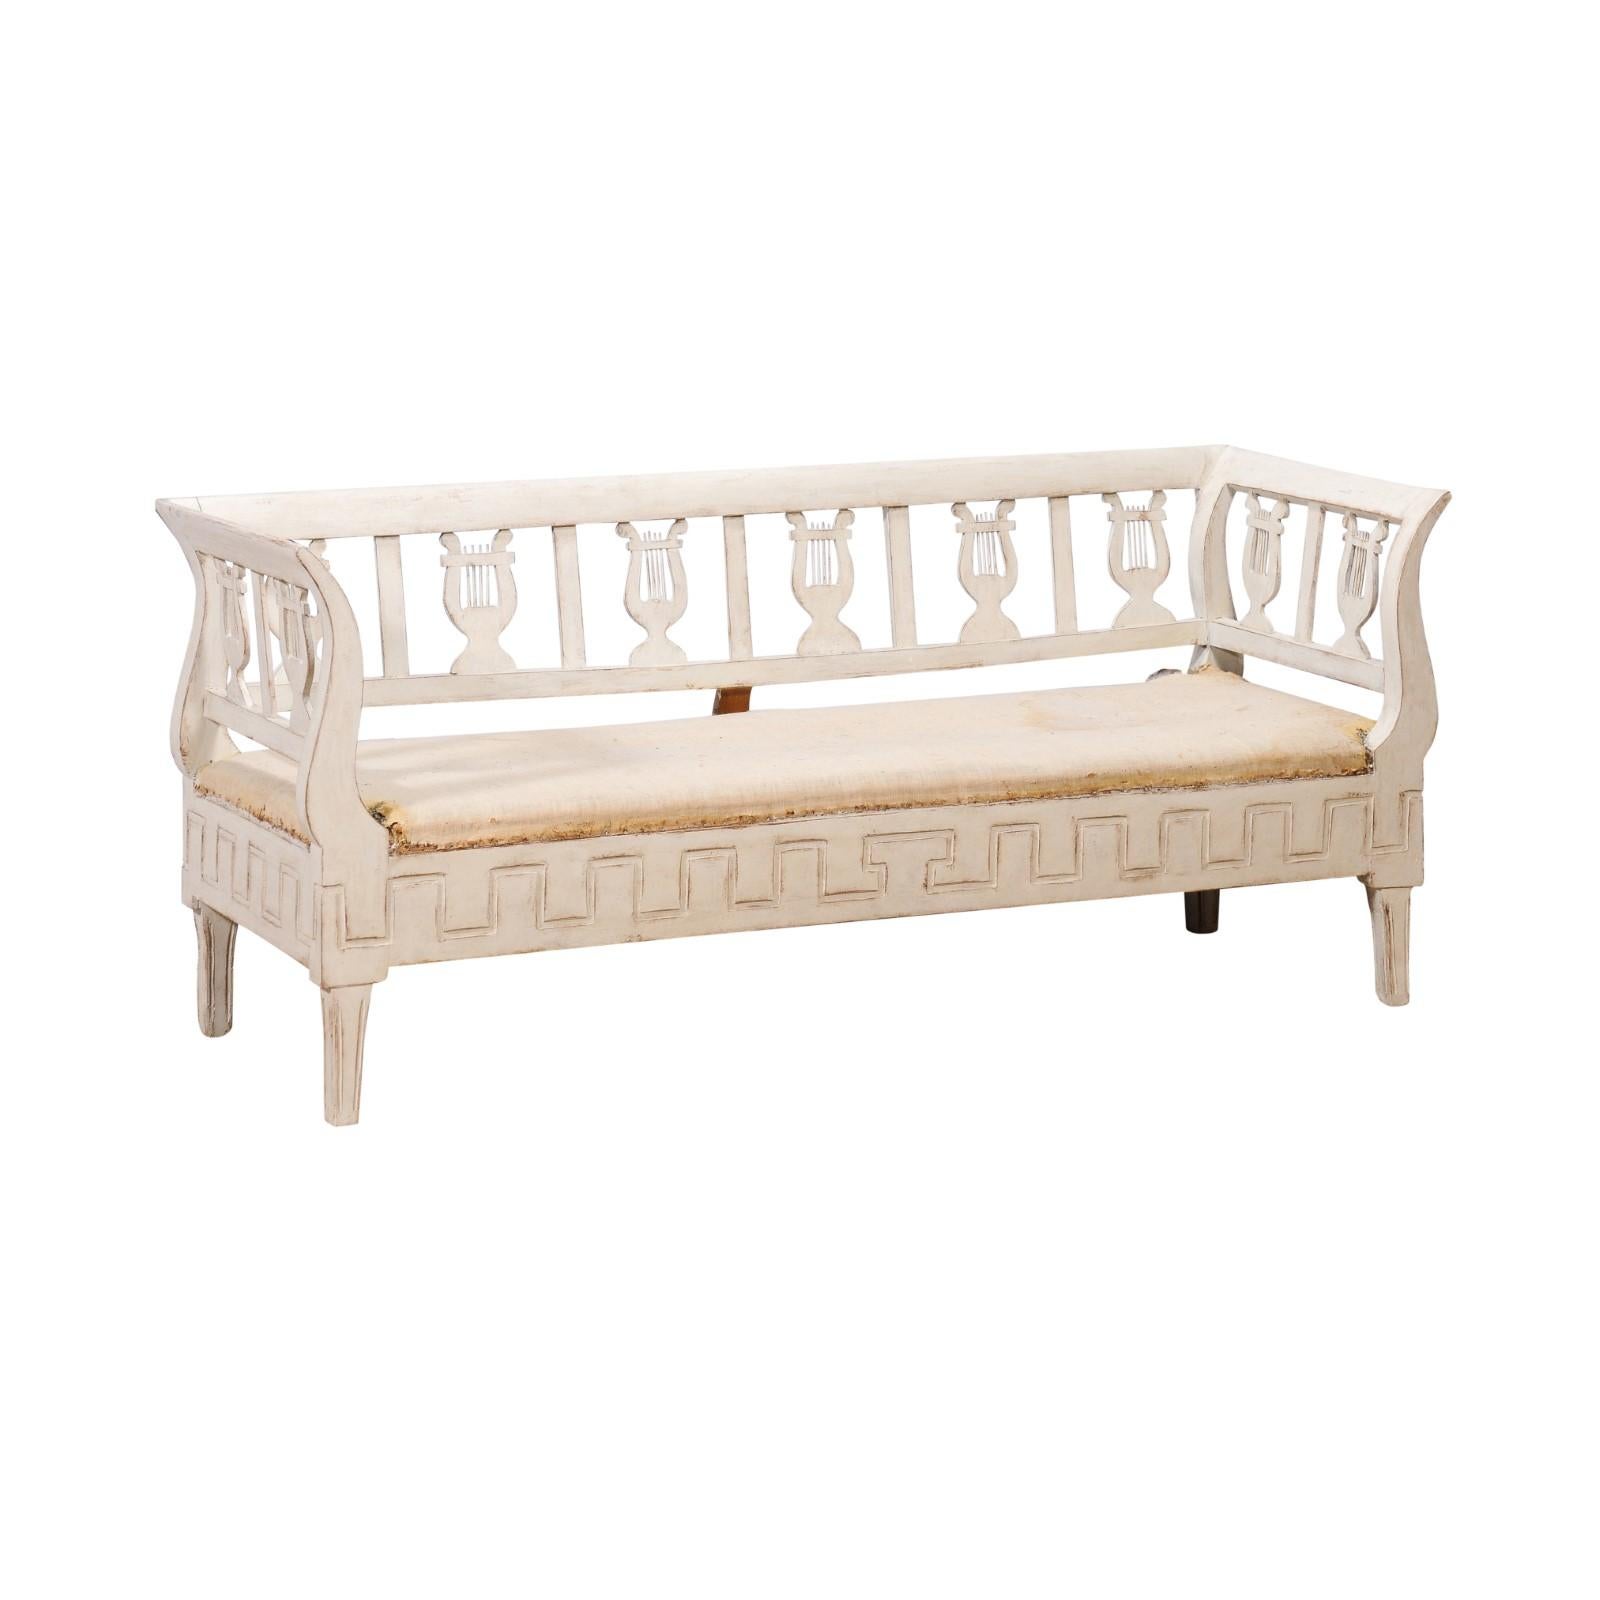 Swedish Karl Johan Period 1820s Painted Sofa with Carved Lyres For Sale 6